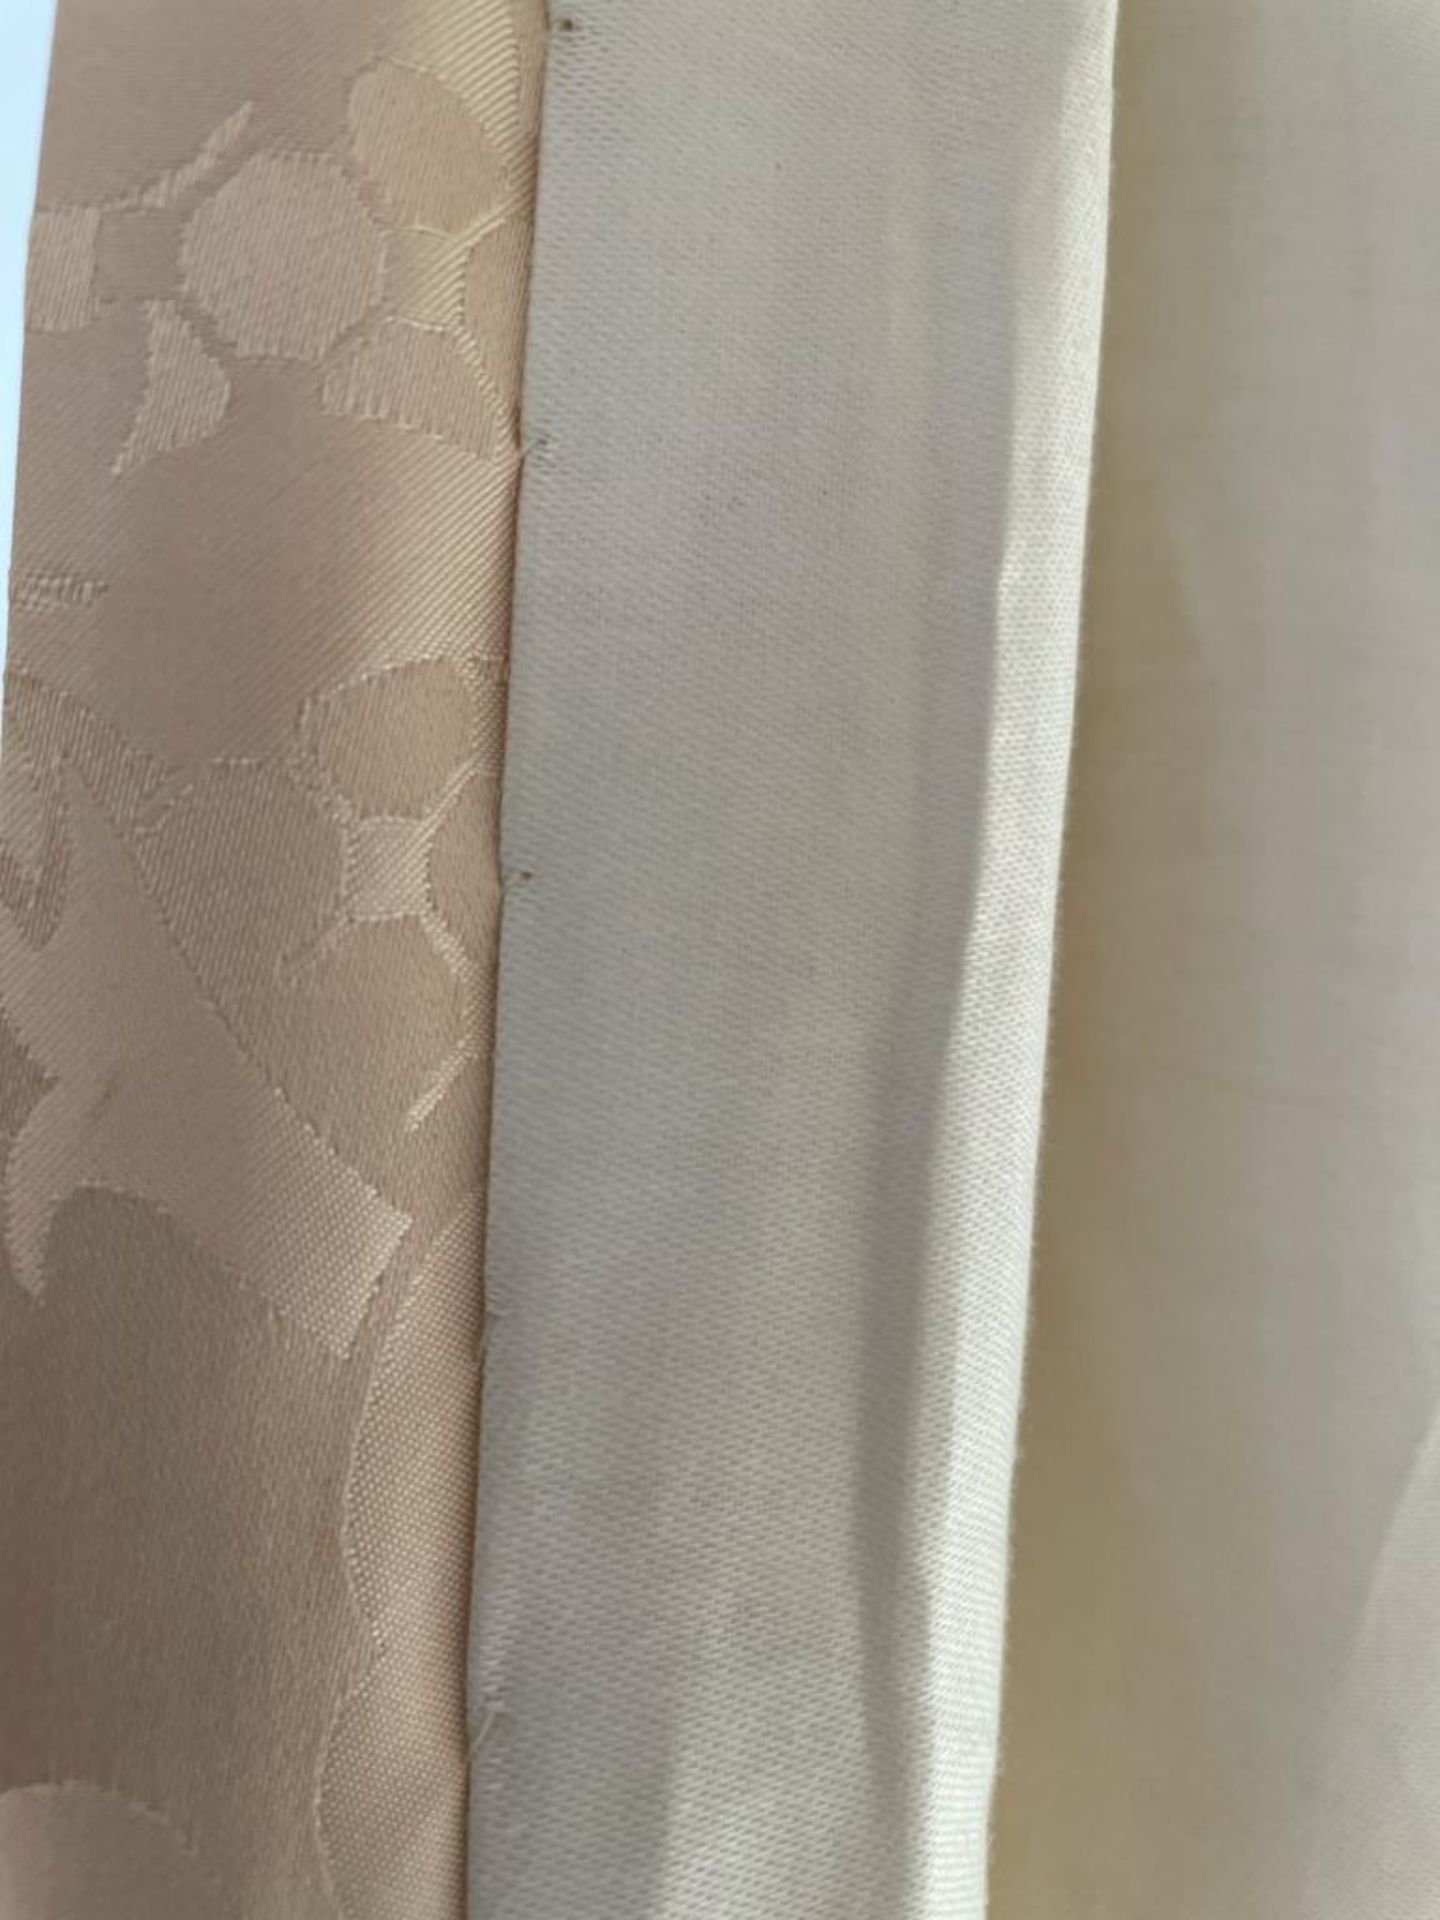 1 x Pair of Fabric Curtains With Blackout Liner and Brass Curtain Rail - Height 220 x Pole Length - Image 8 of 15